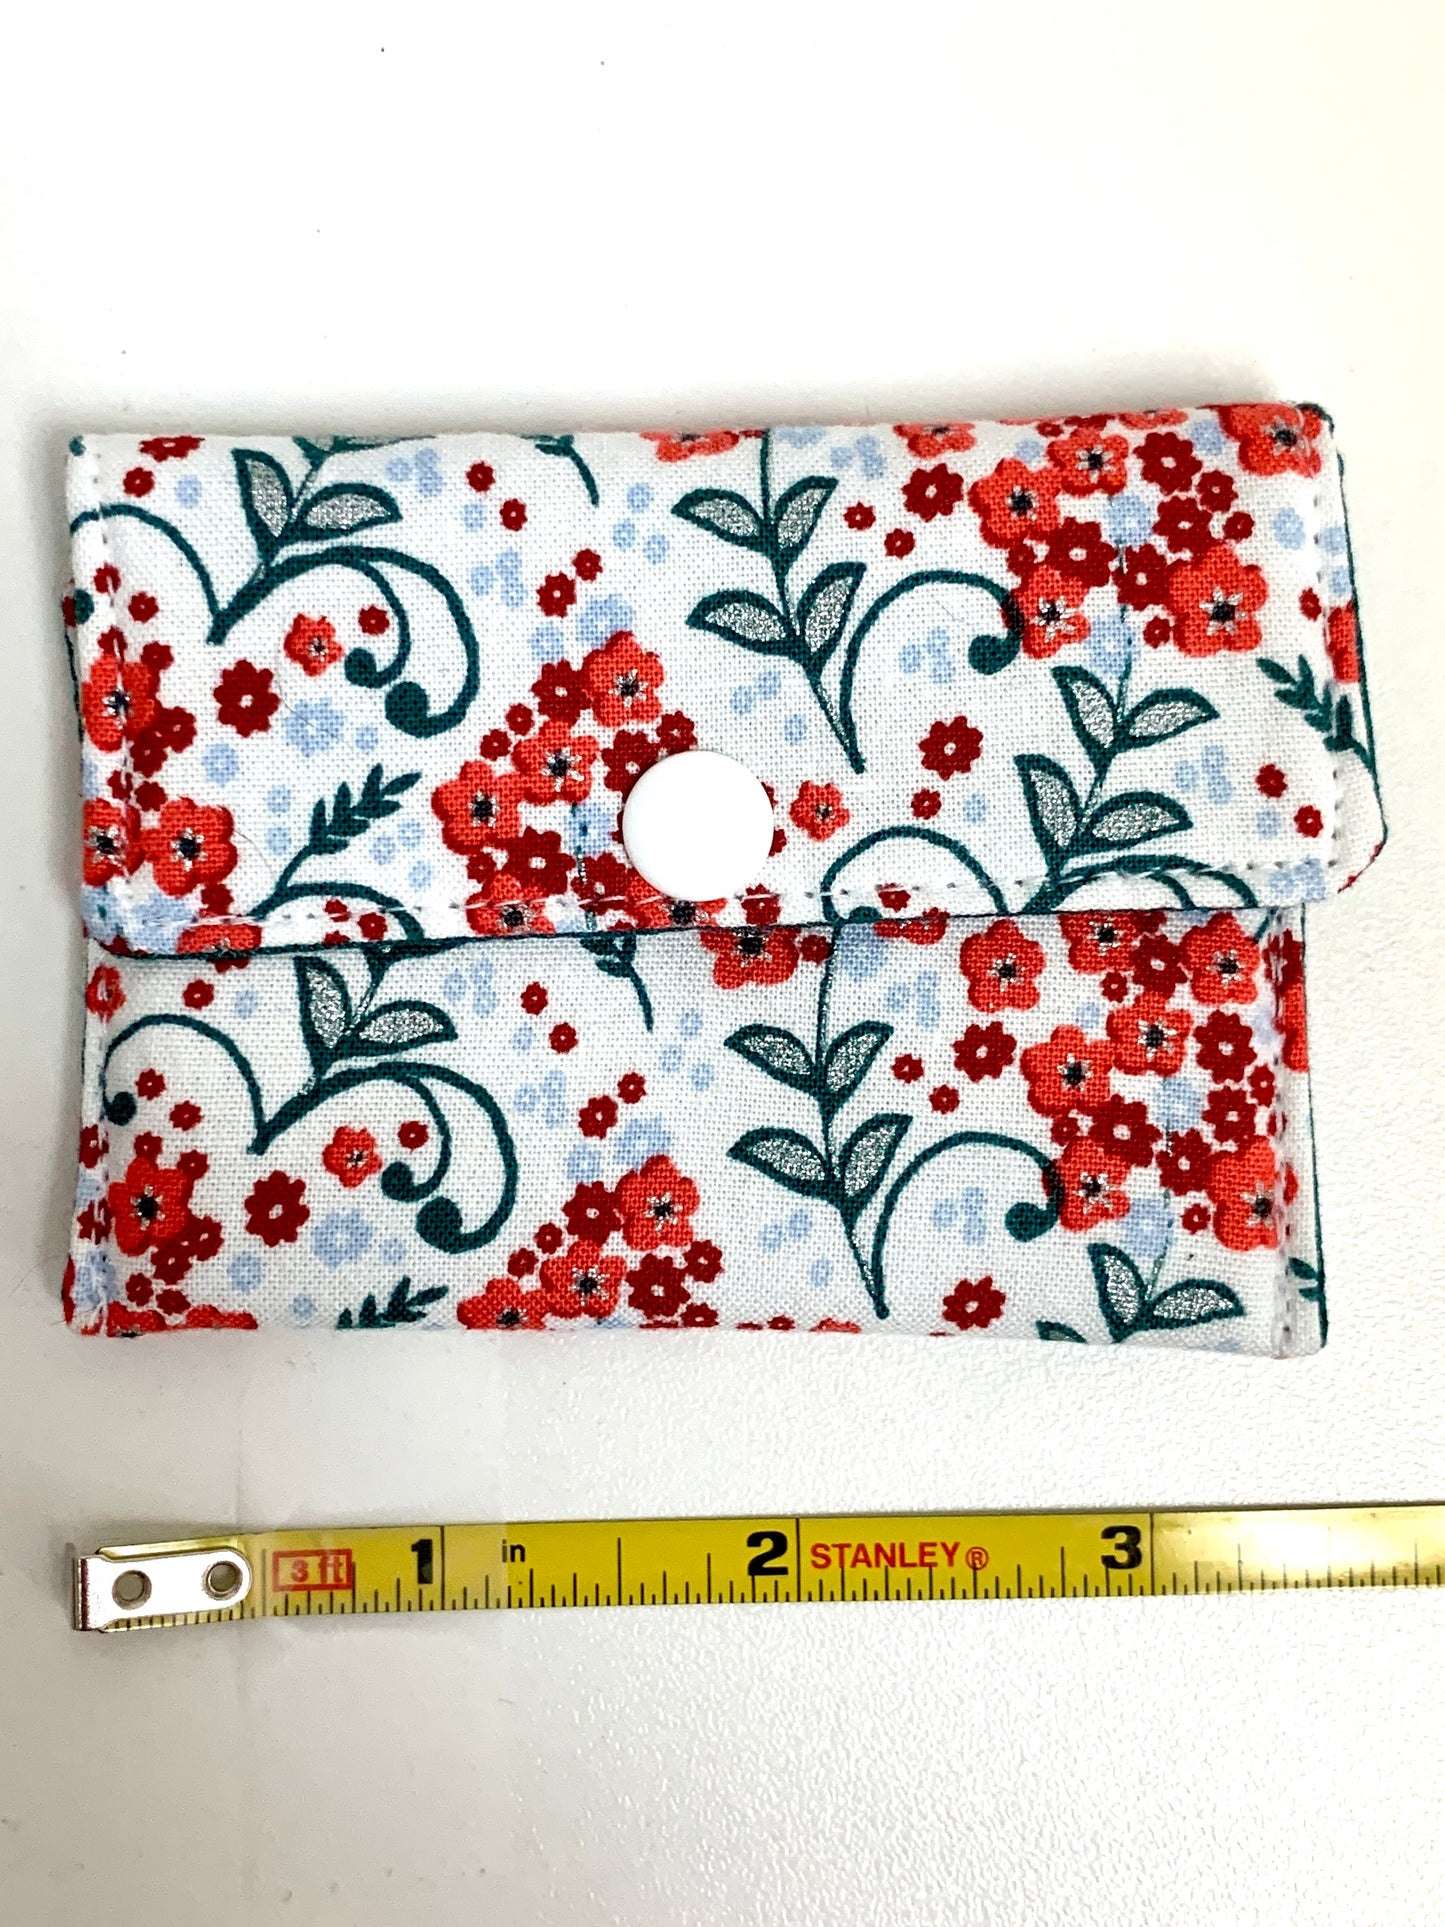 MommySew - Tiny Notions Pouch